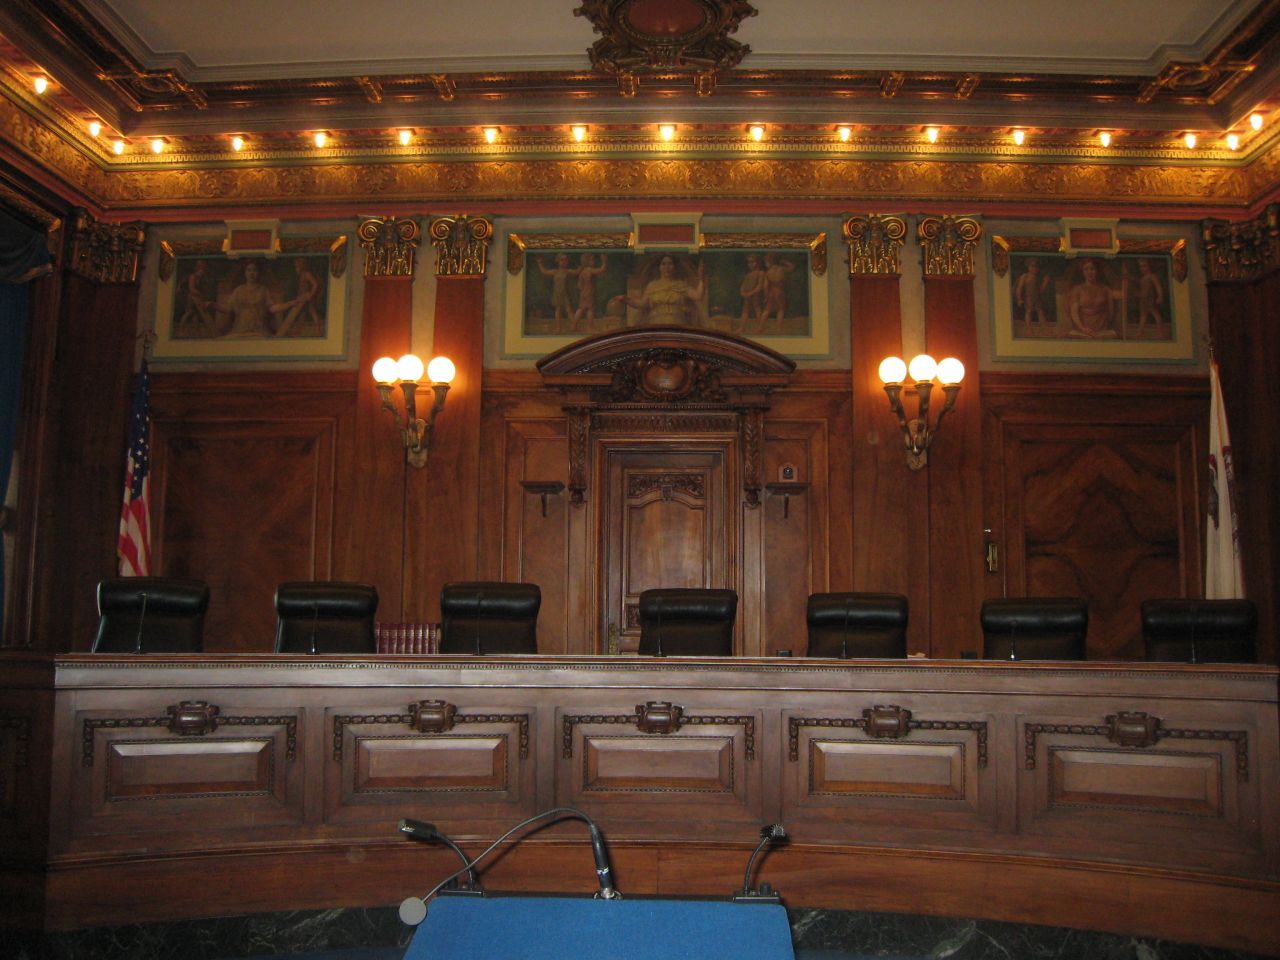 The seven Illinois Supreme Court justices preside in this courtroom